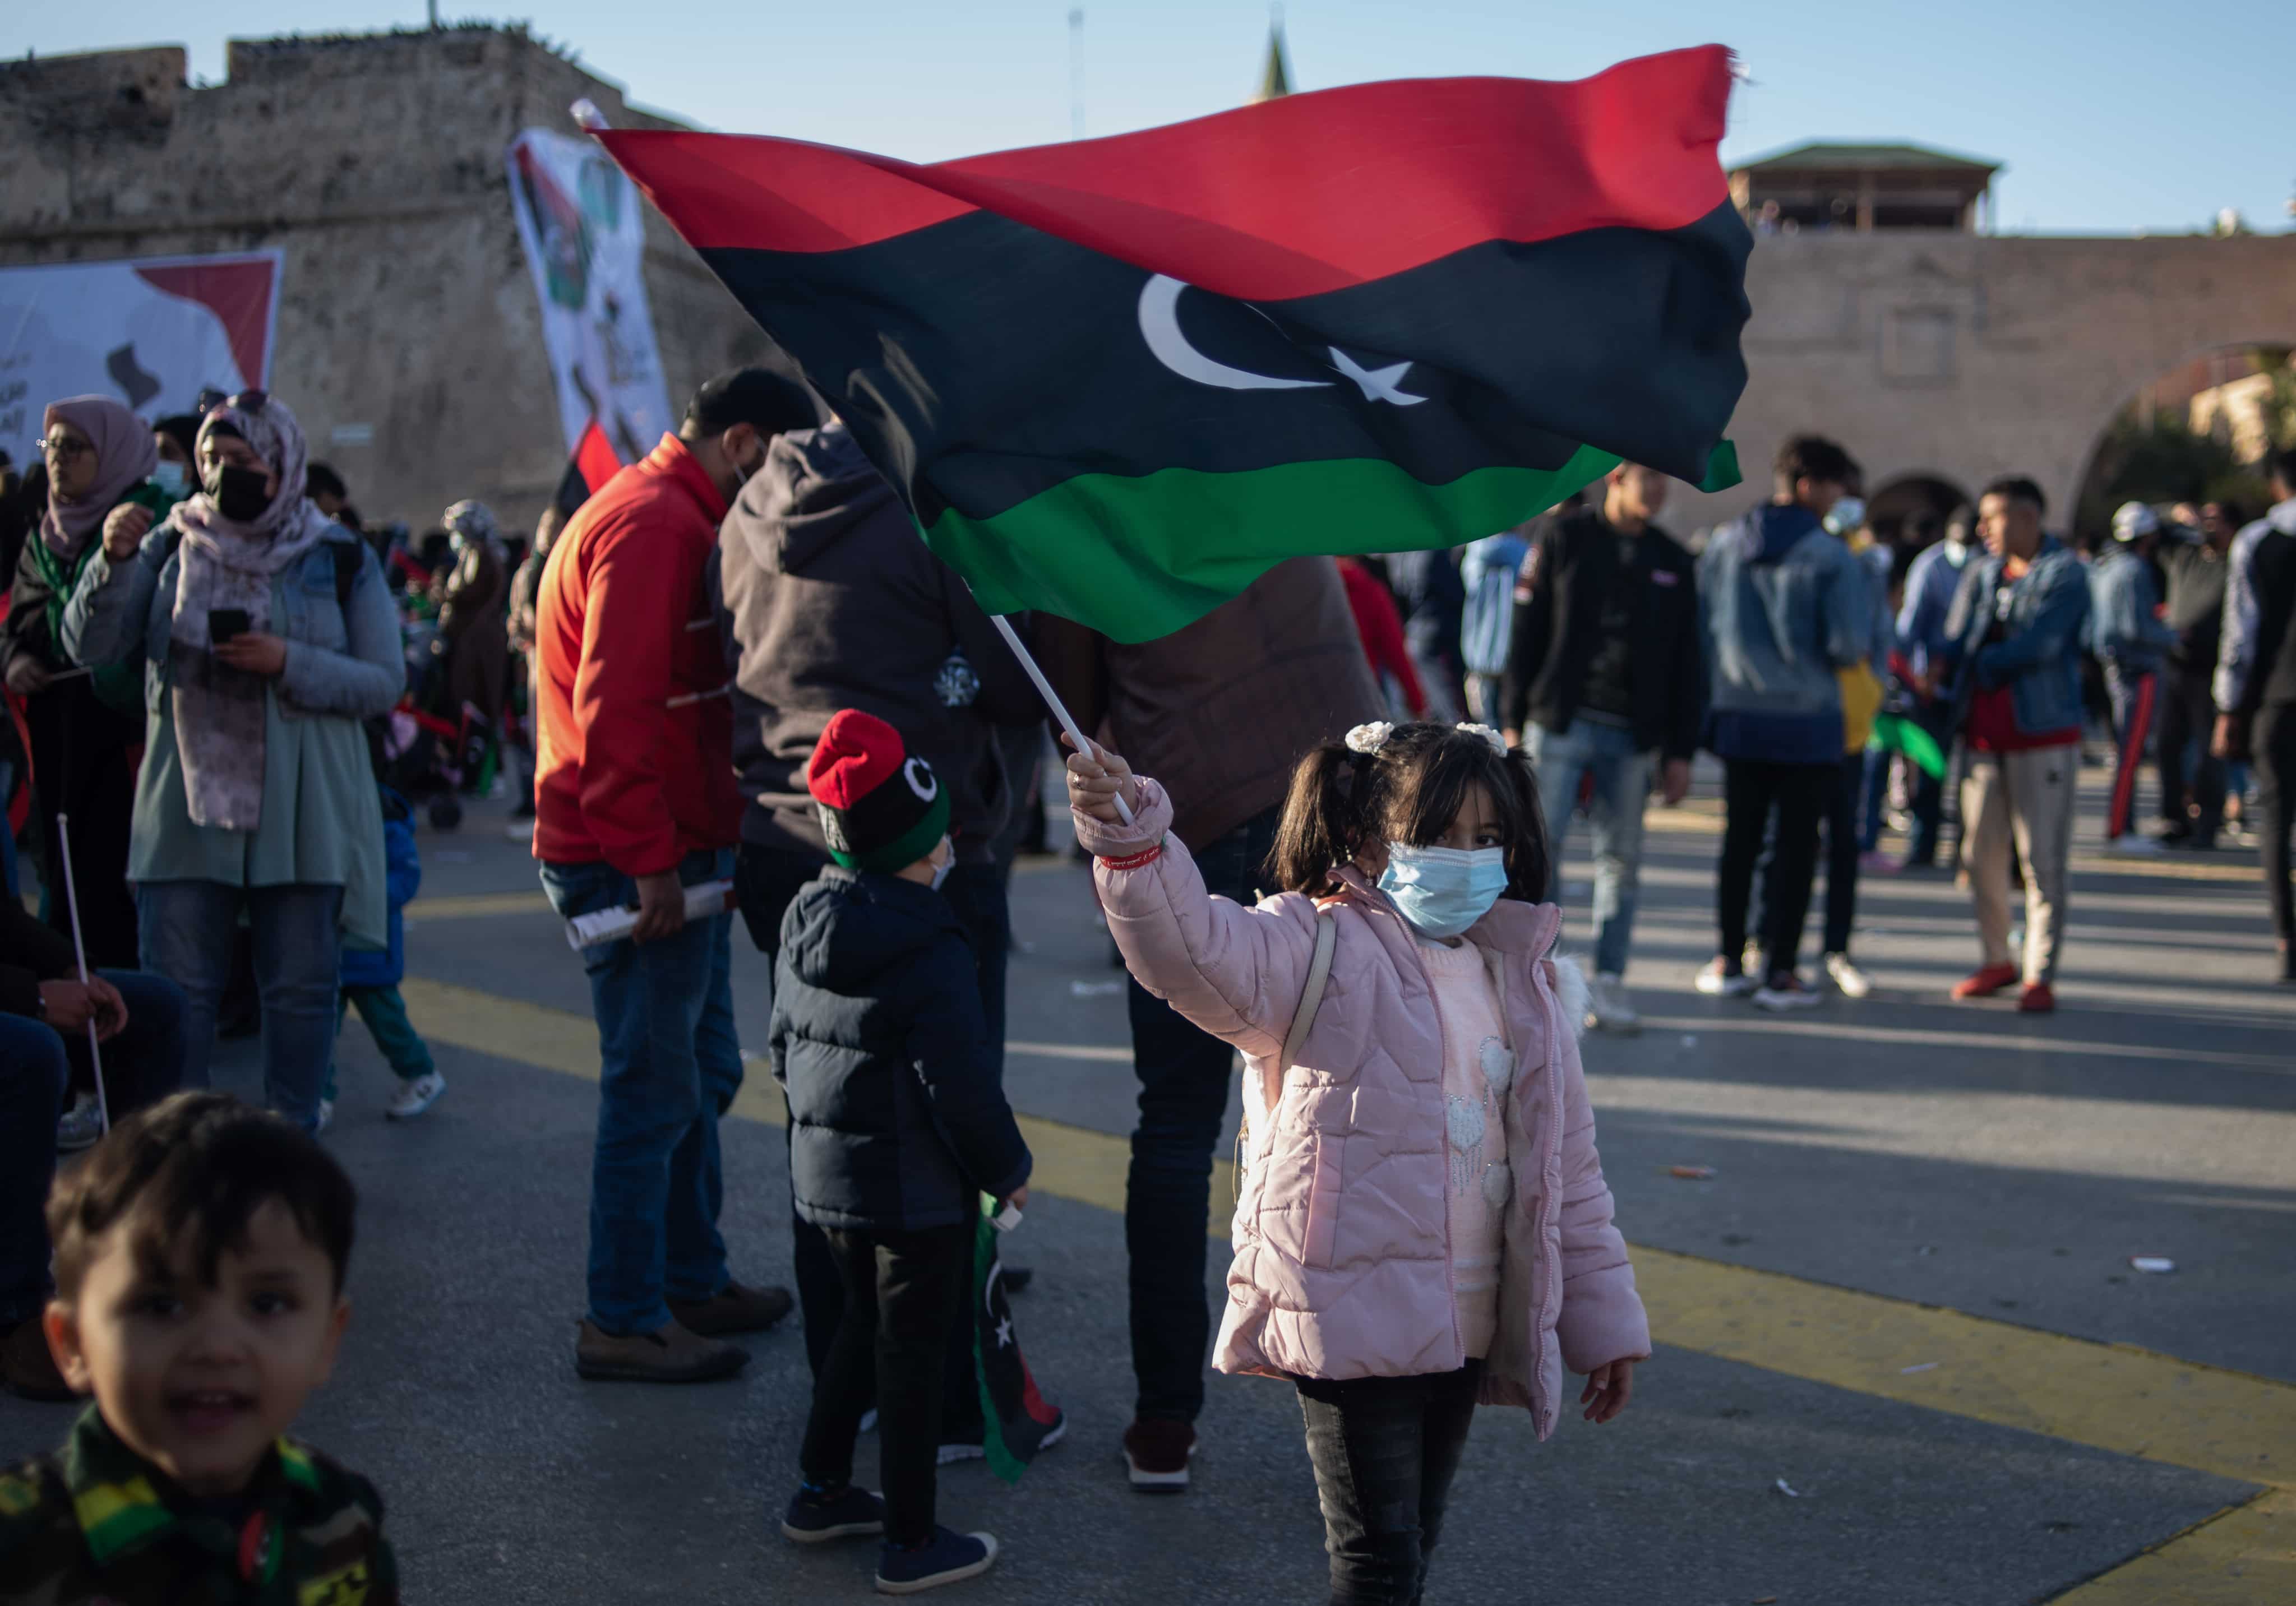 Libya Armed Groups Agree to Leave Tripoli After Deadly Fighting